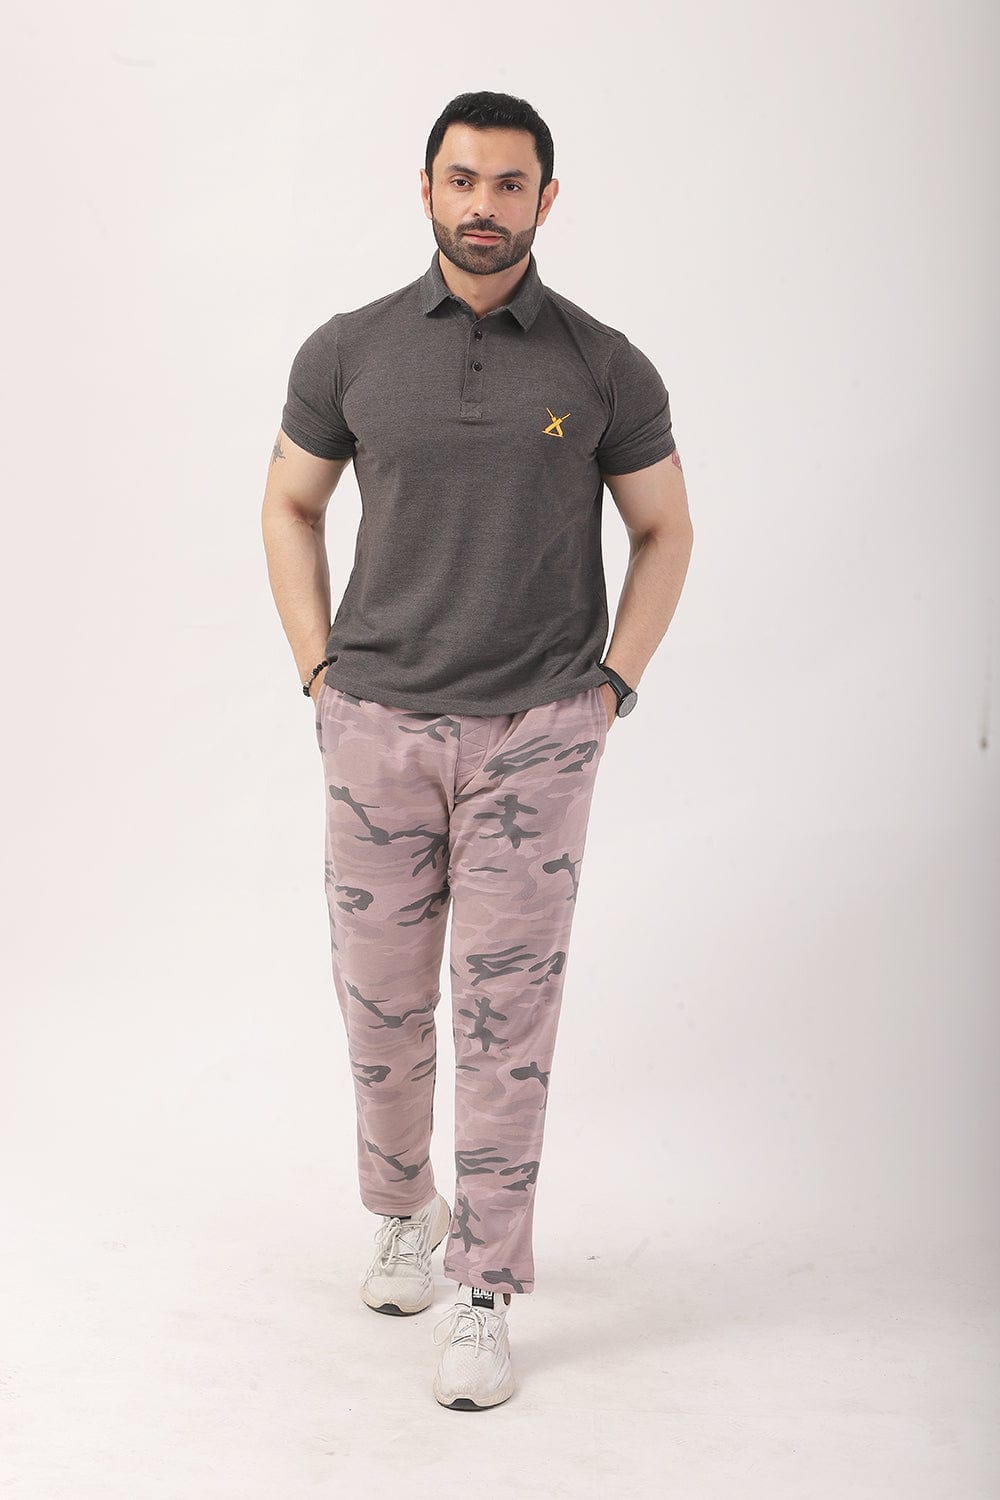 Hope Not Out by Shahid Afridi Men Trouser Fashion Camo Trouser